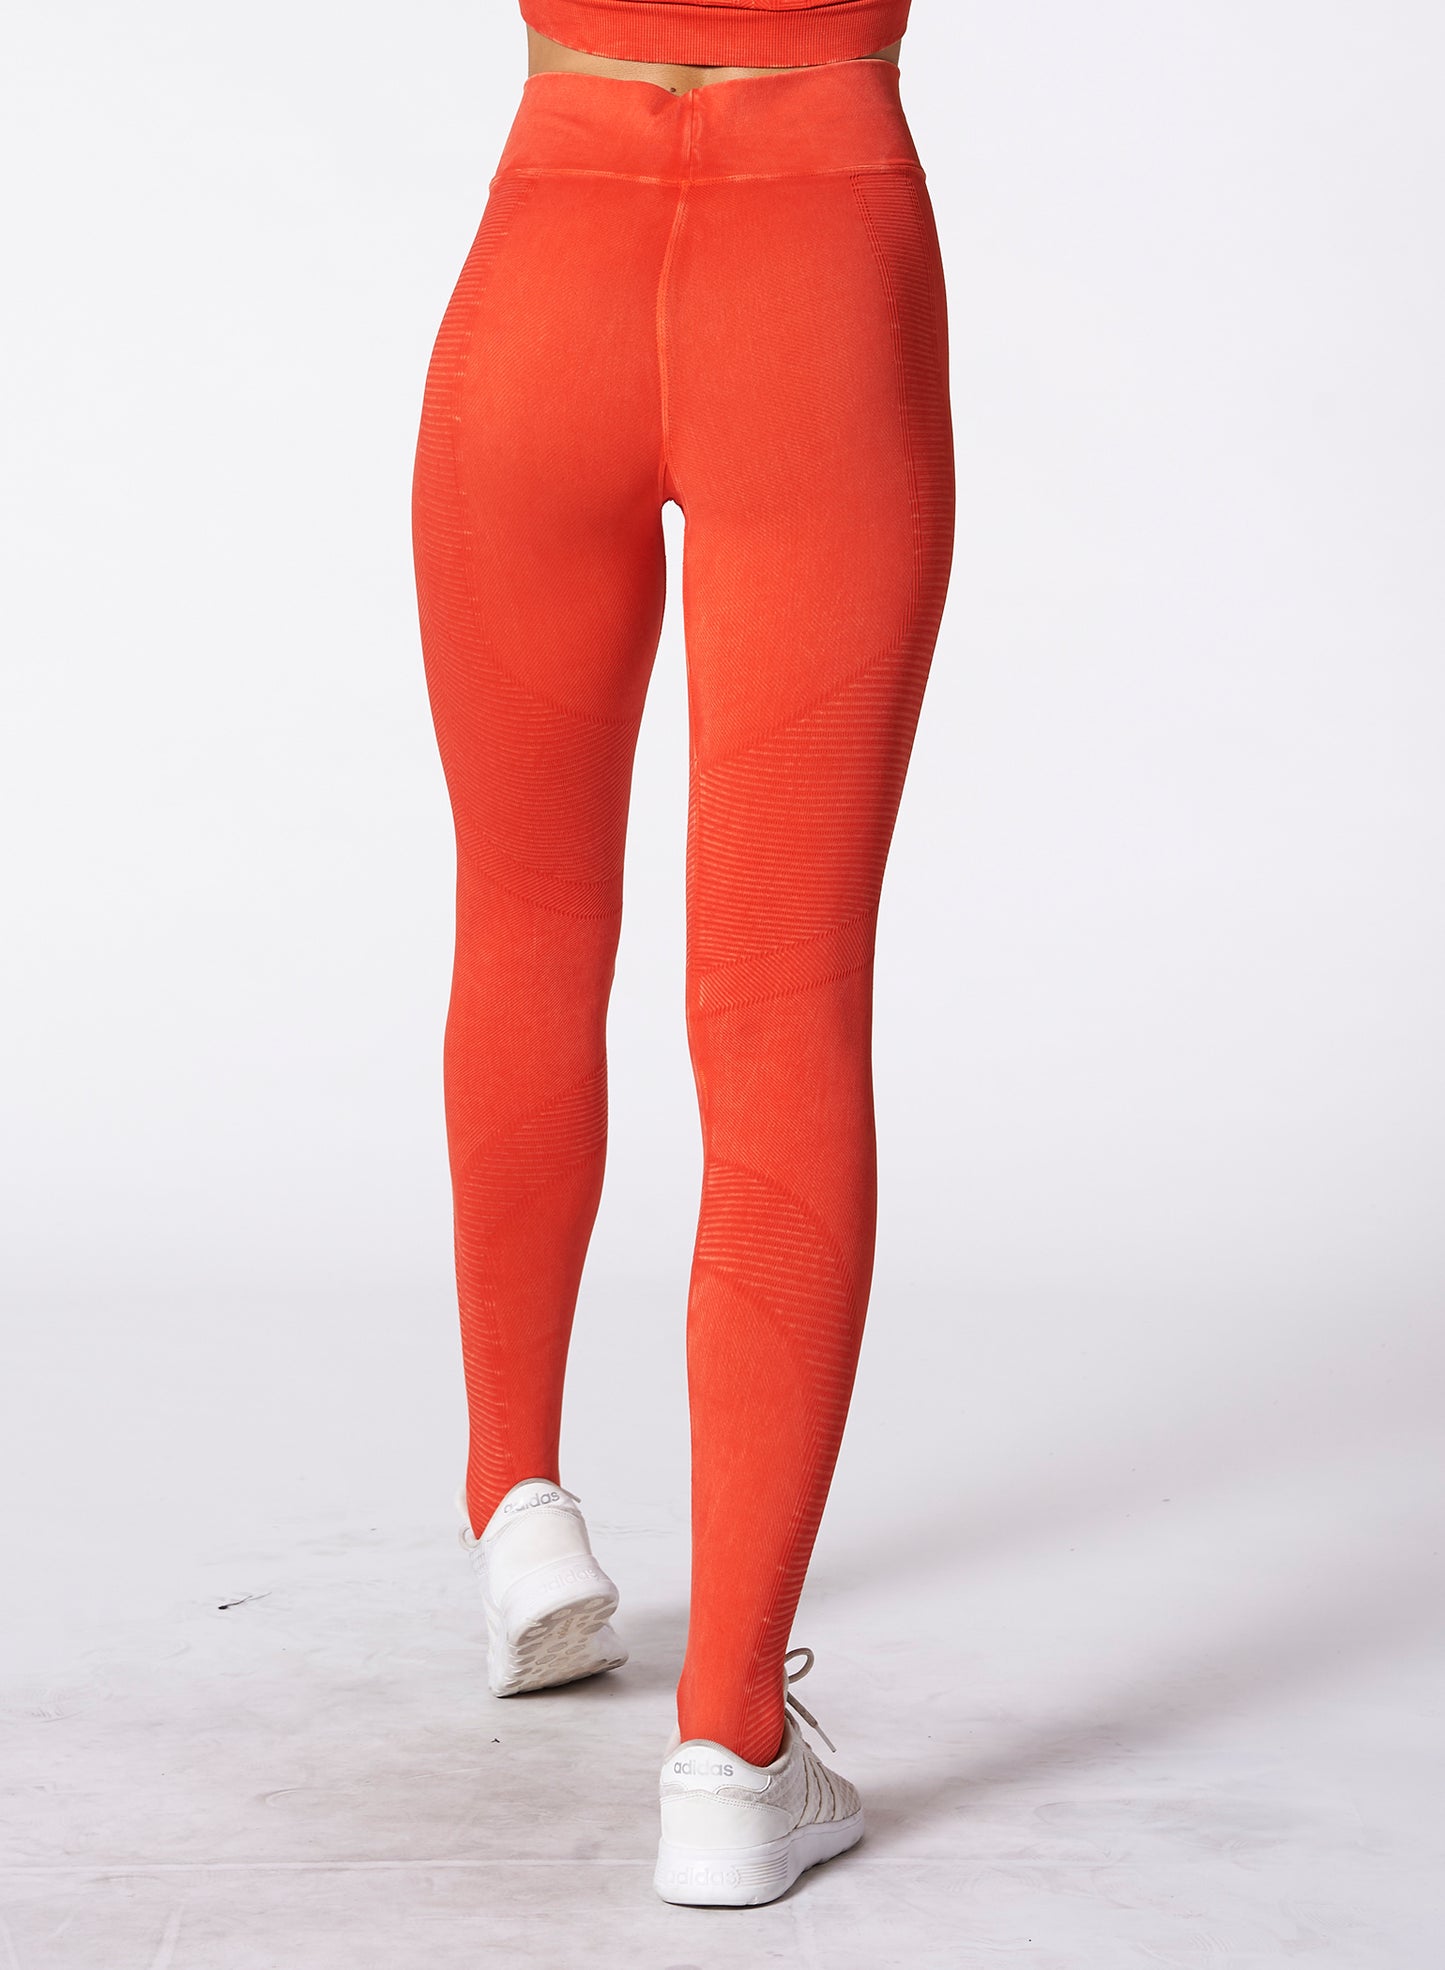 One By One Legging by NUX Active